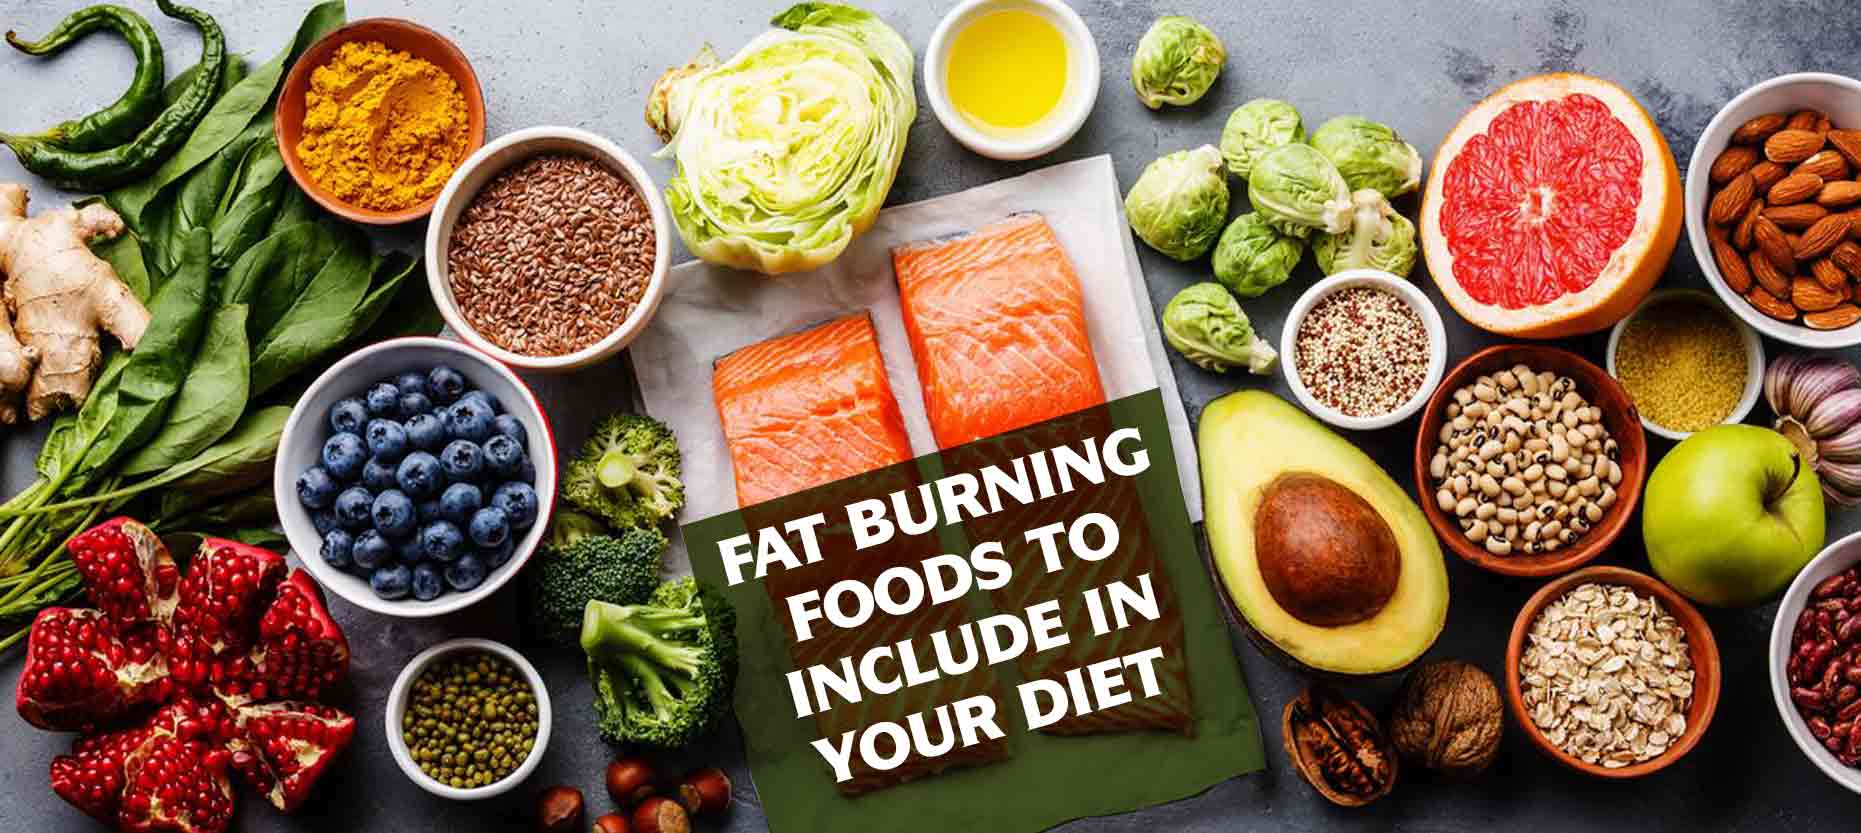 Fat Burning Foods To Include In Your Diet